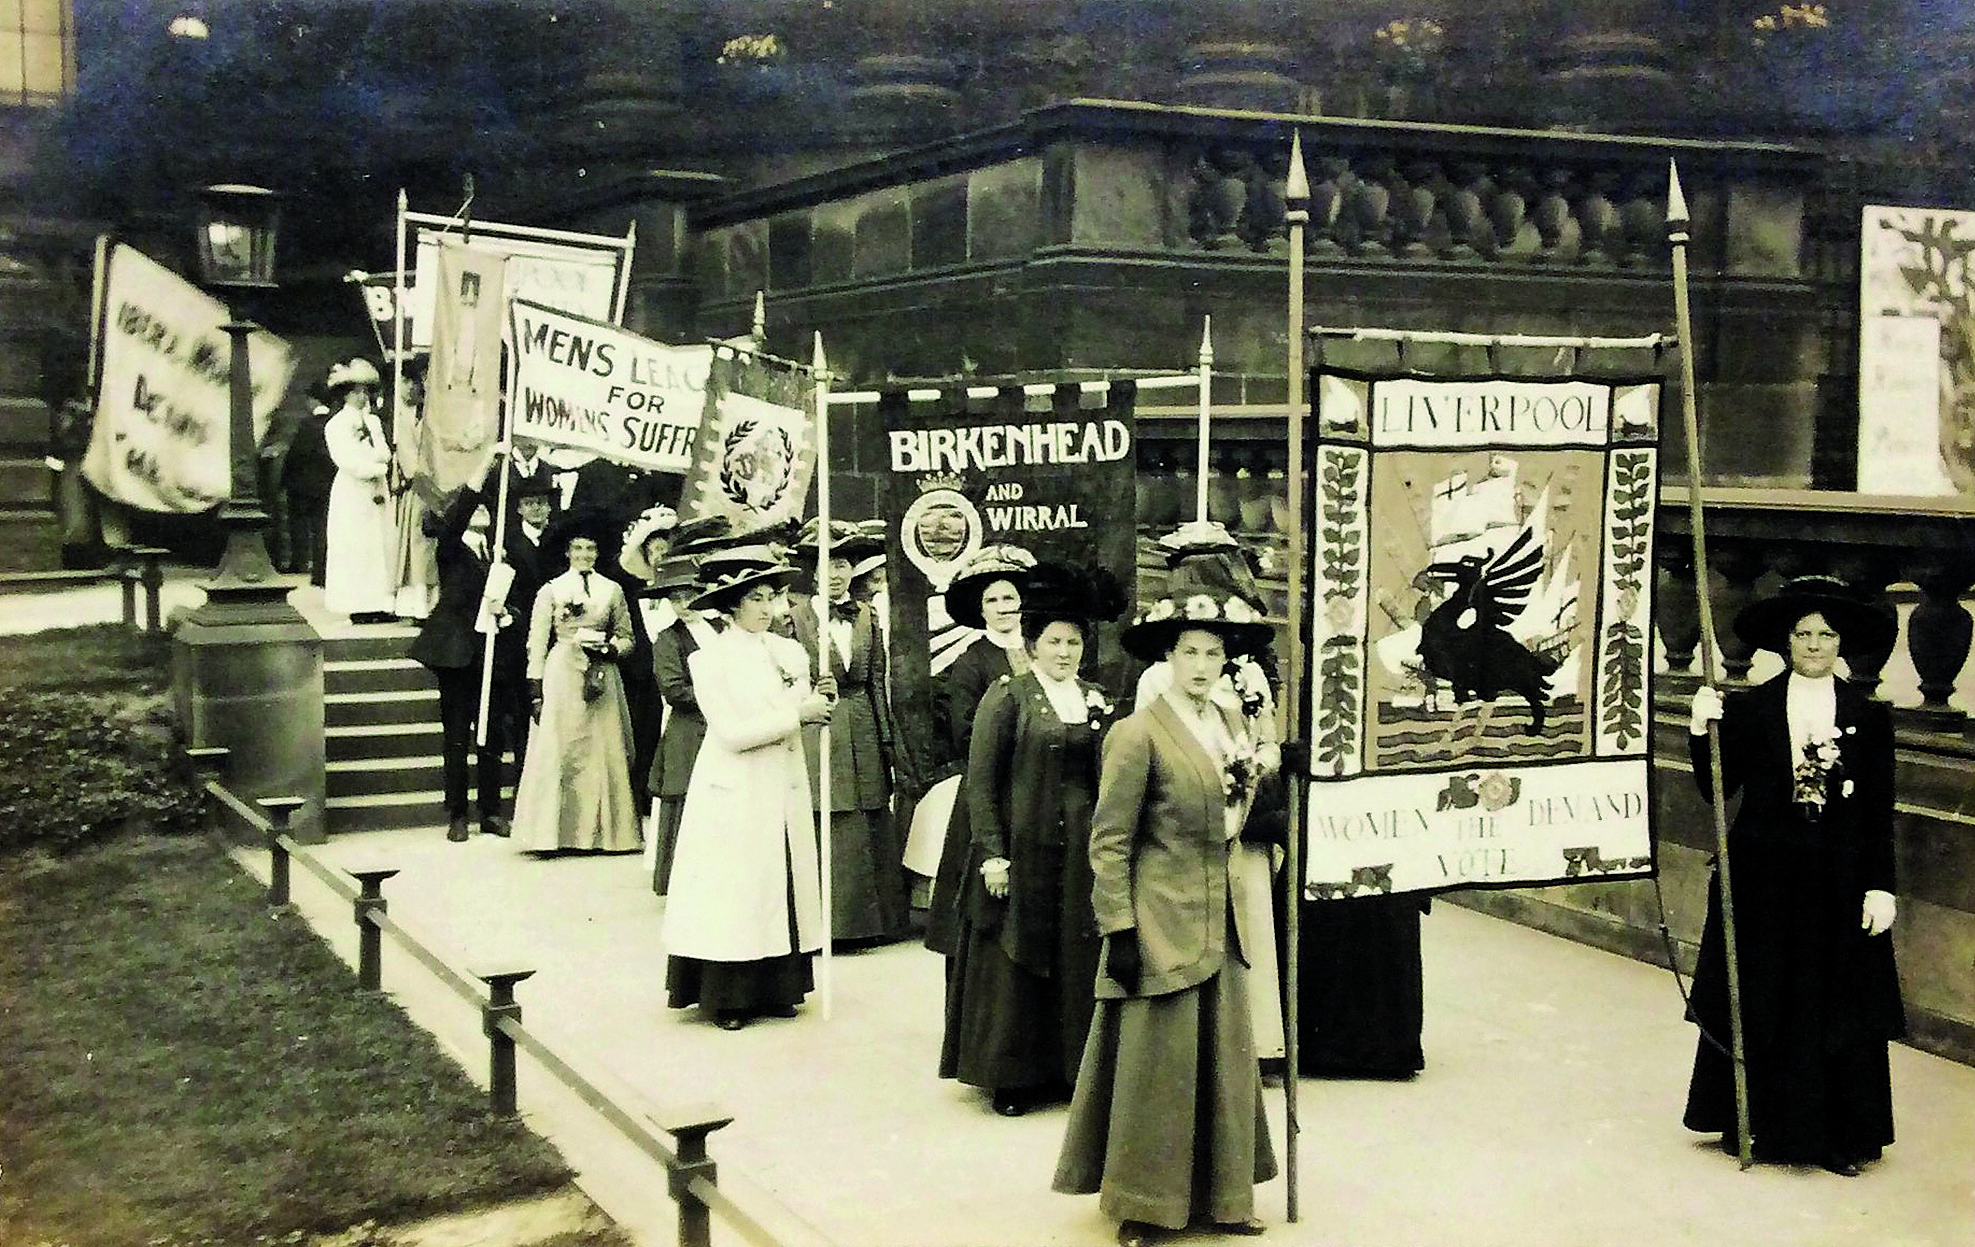 Suffragists - including men - from the north-west of England and their banners. This photograph is in the collection of Birkenhead pilgrim Alice New.